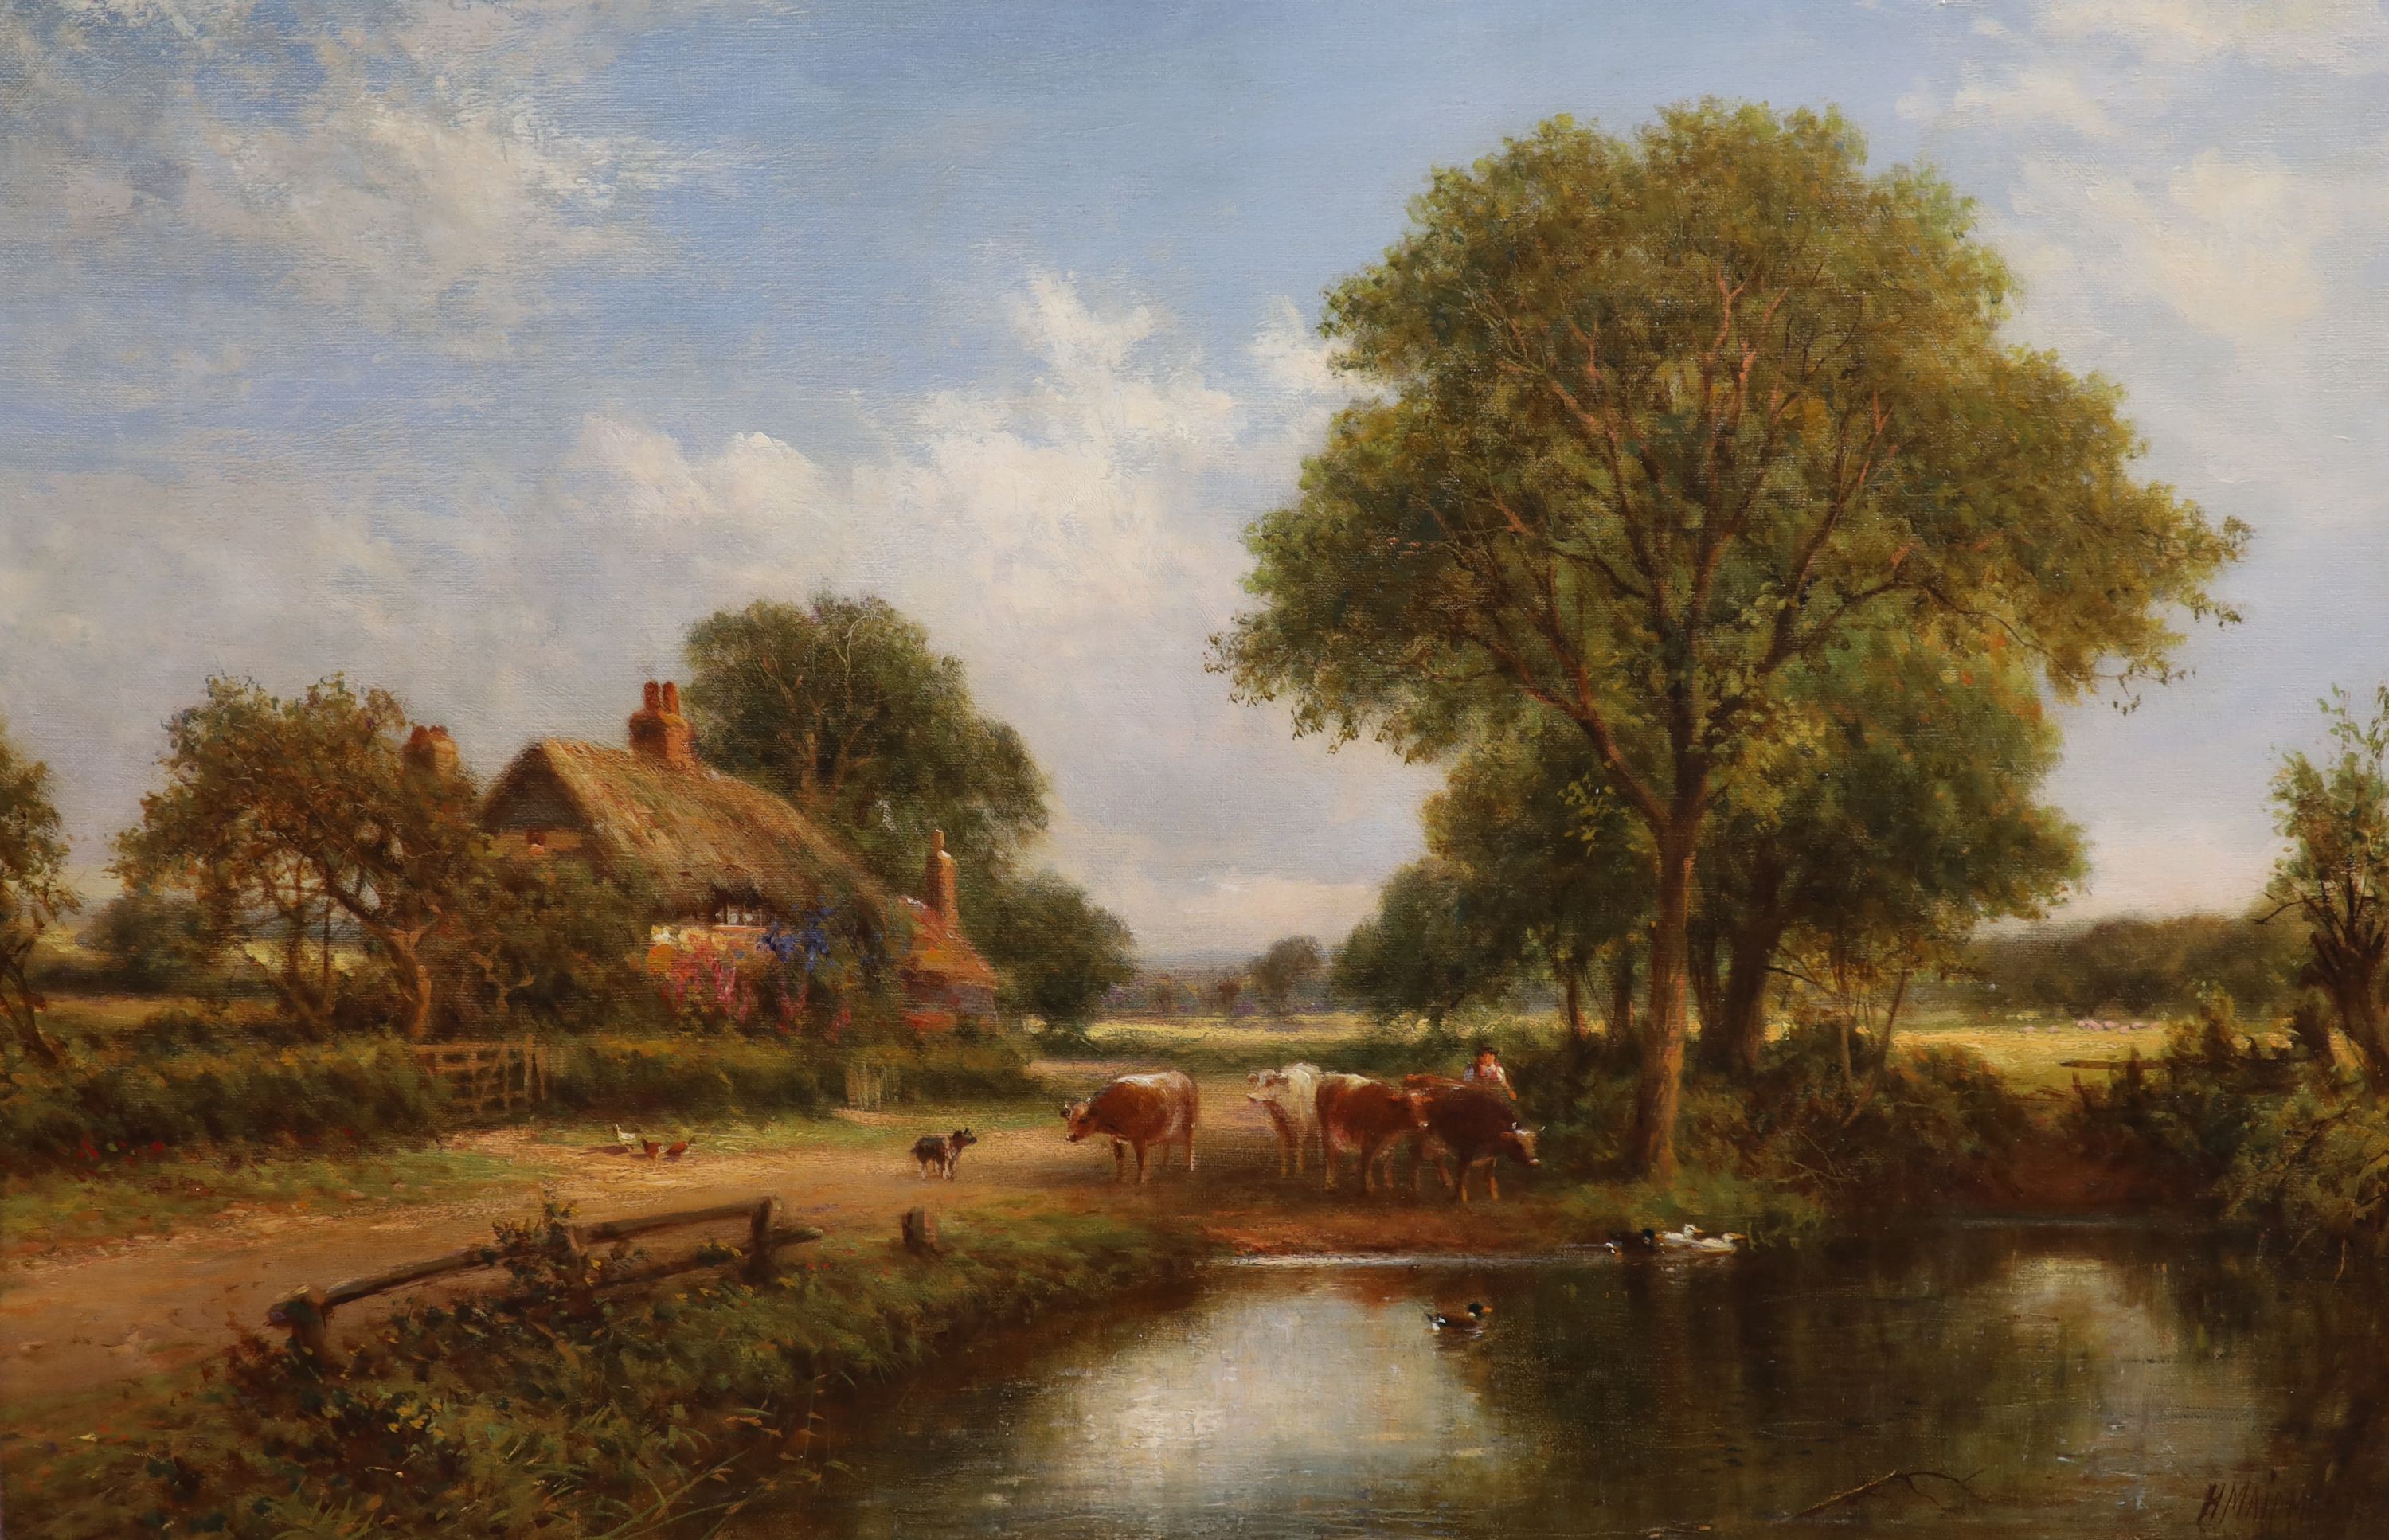 Henry Maidment (1889-1914), Cattle by the duck pond, Oil on canvas, 50 x 75 cm.